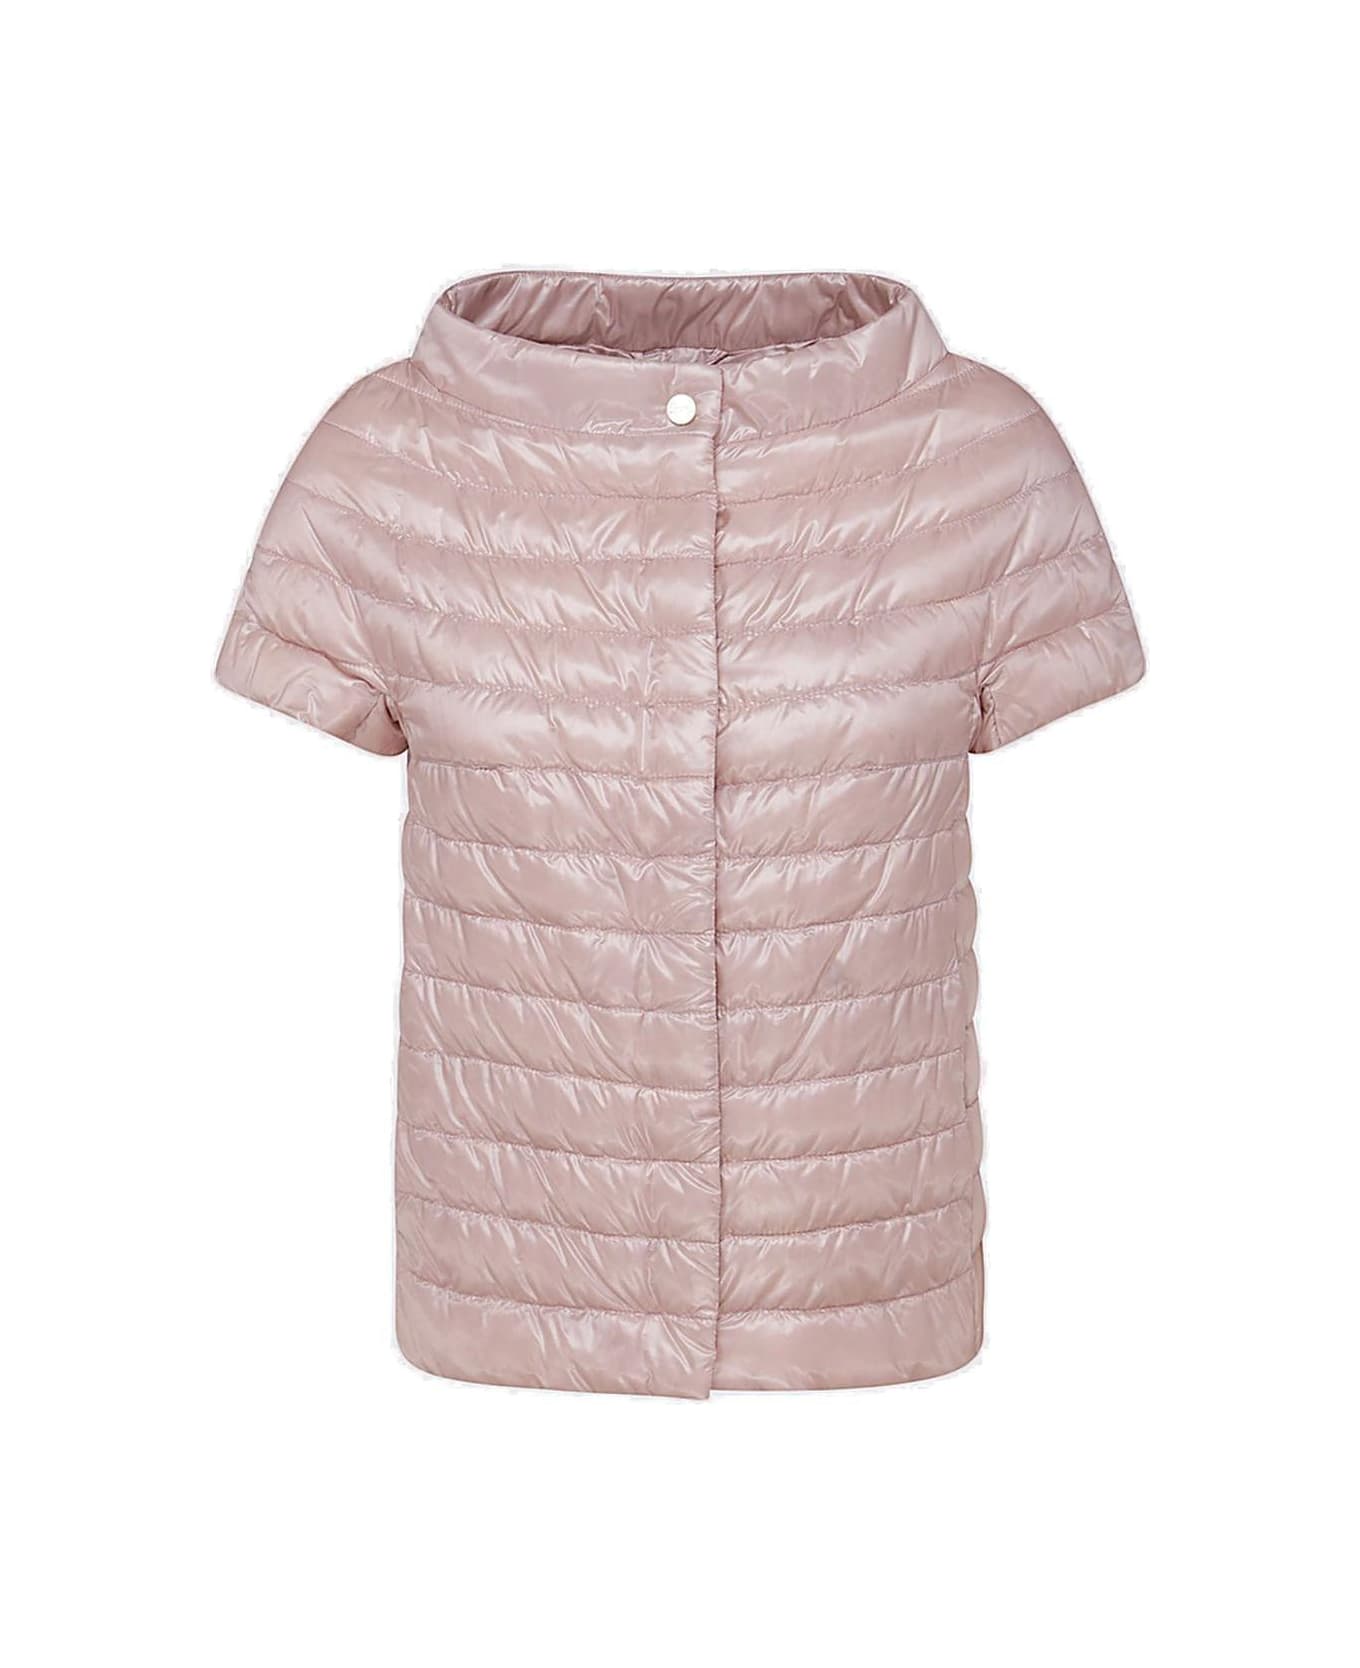 Herno Quilted Short-sleeve Jacket - Rosa Pallido